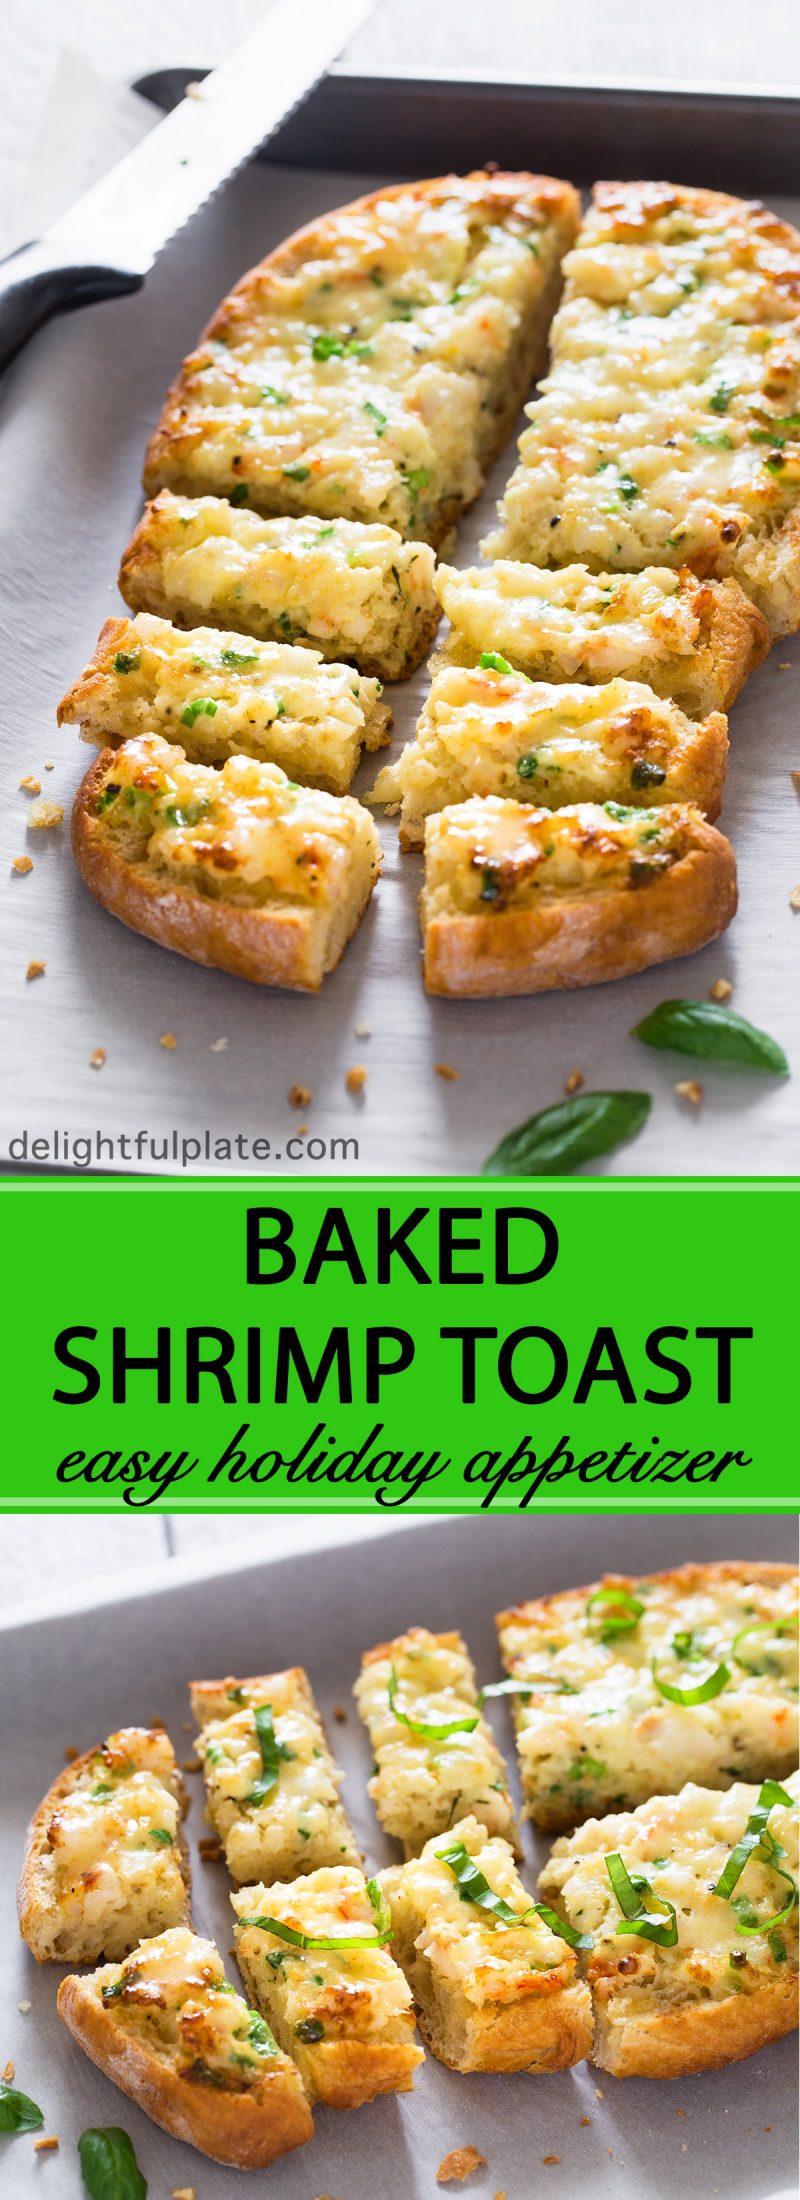 This baked shrimp toast features rich and creamy shrimp mixture on top of crispy bread. If you are looking for a quick and easy appetizer for your next party, give this a try.